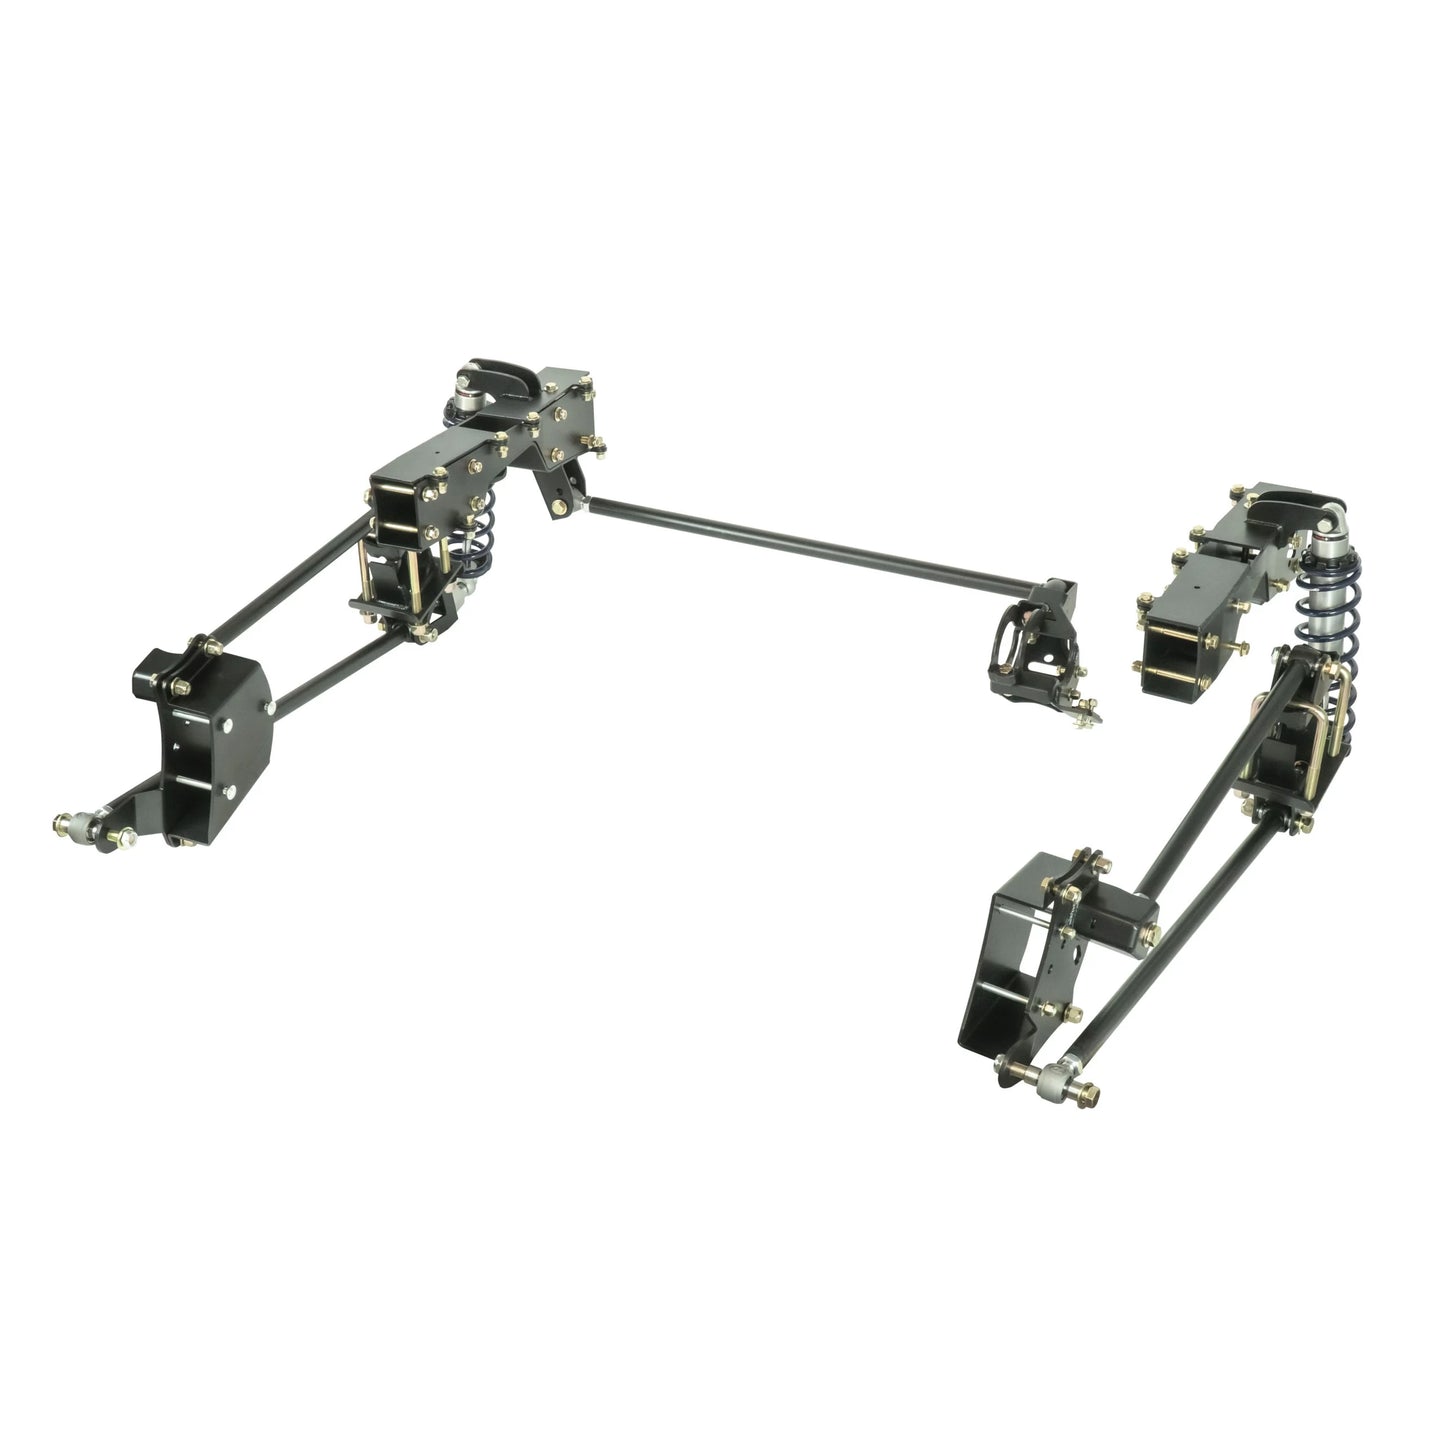 2014-2018 Silverado / Sierra 1500 2WD/4WD (with OE Stamped Steel or Aluminum Arms) Complete Coil-Over Suspension System